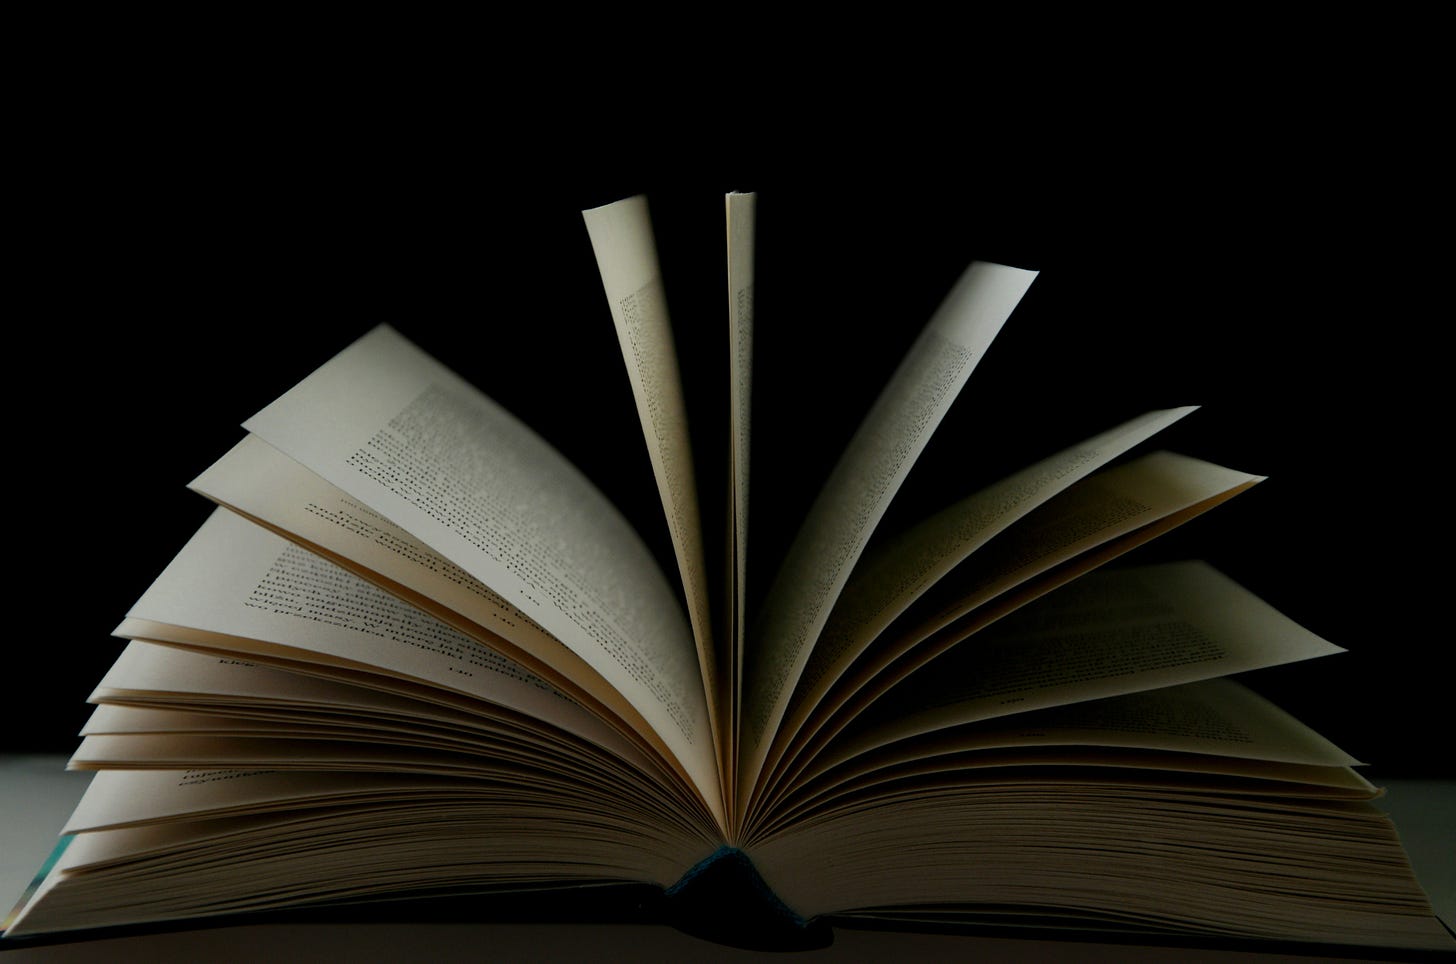 Image of a book against a dark background with the pages flipping.